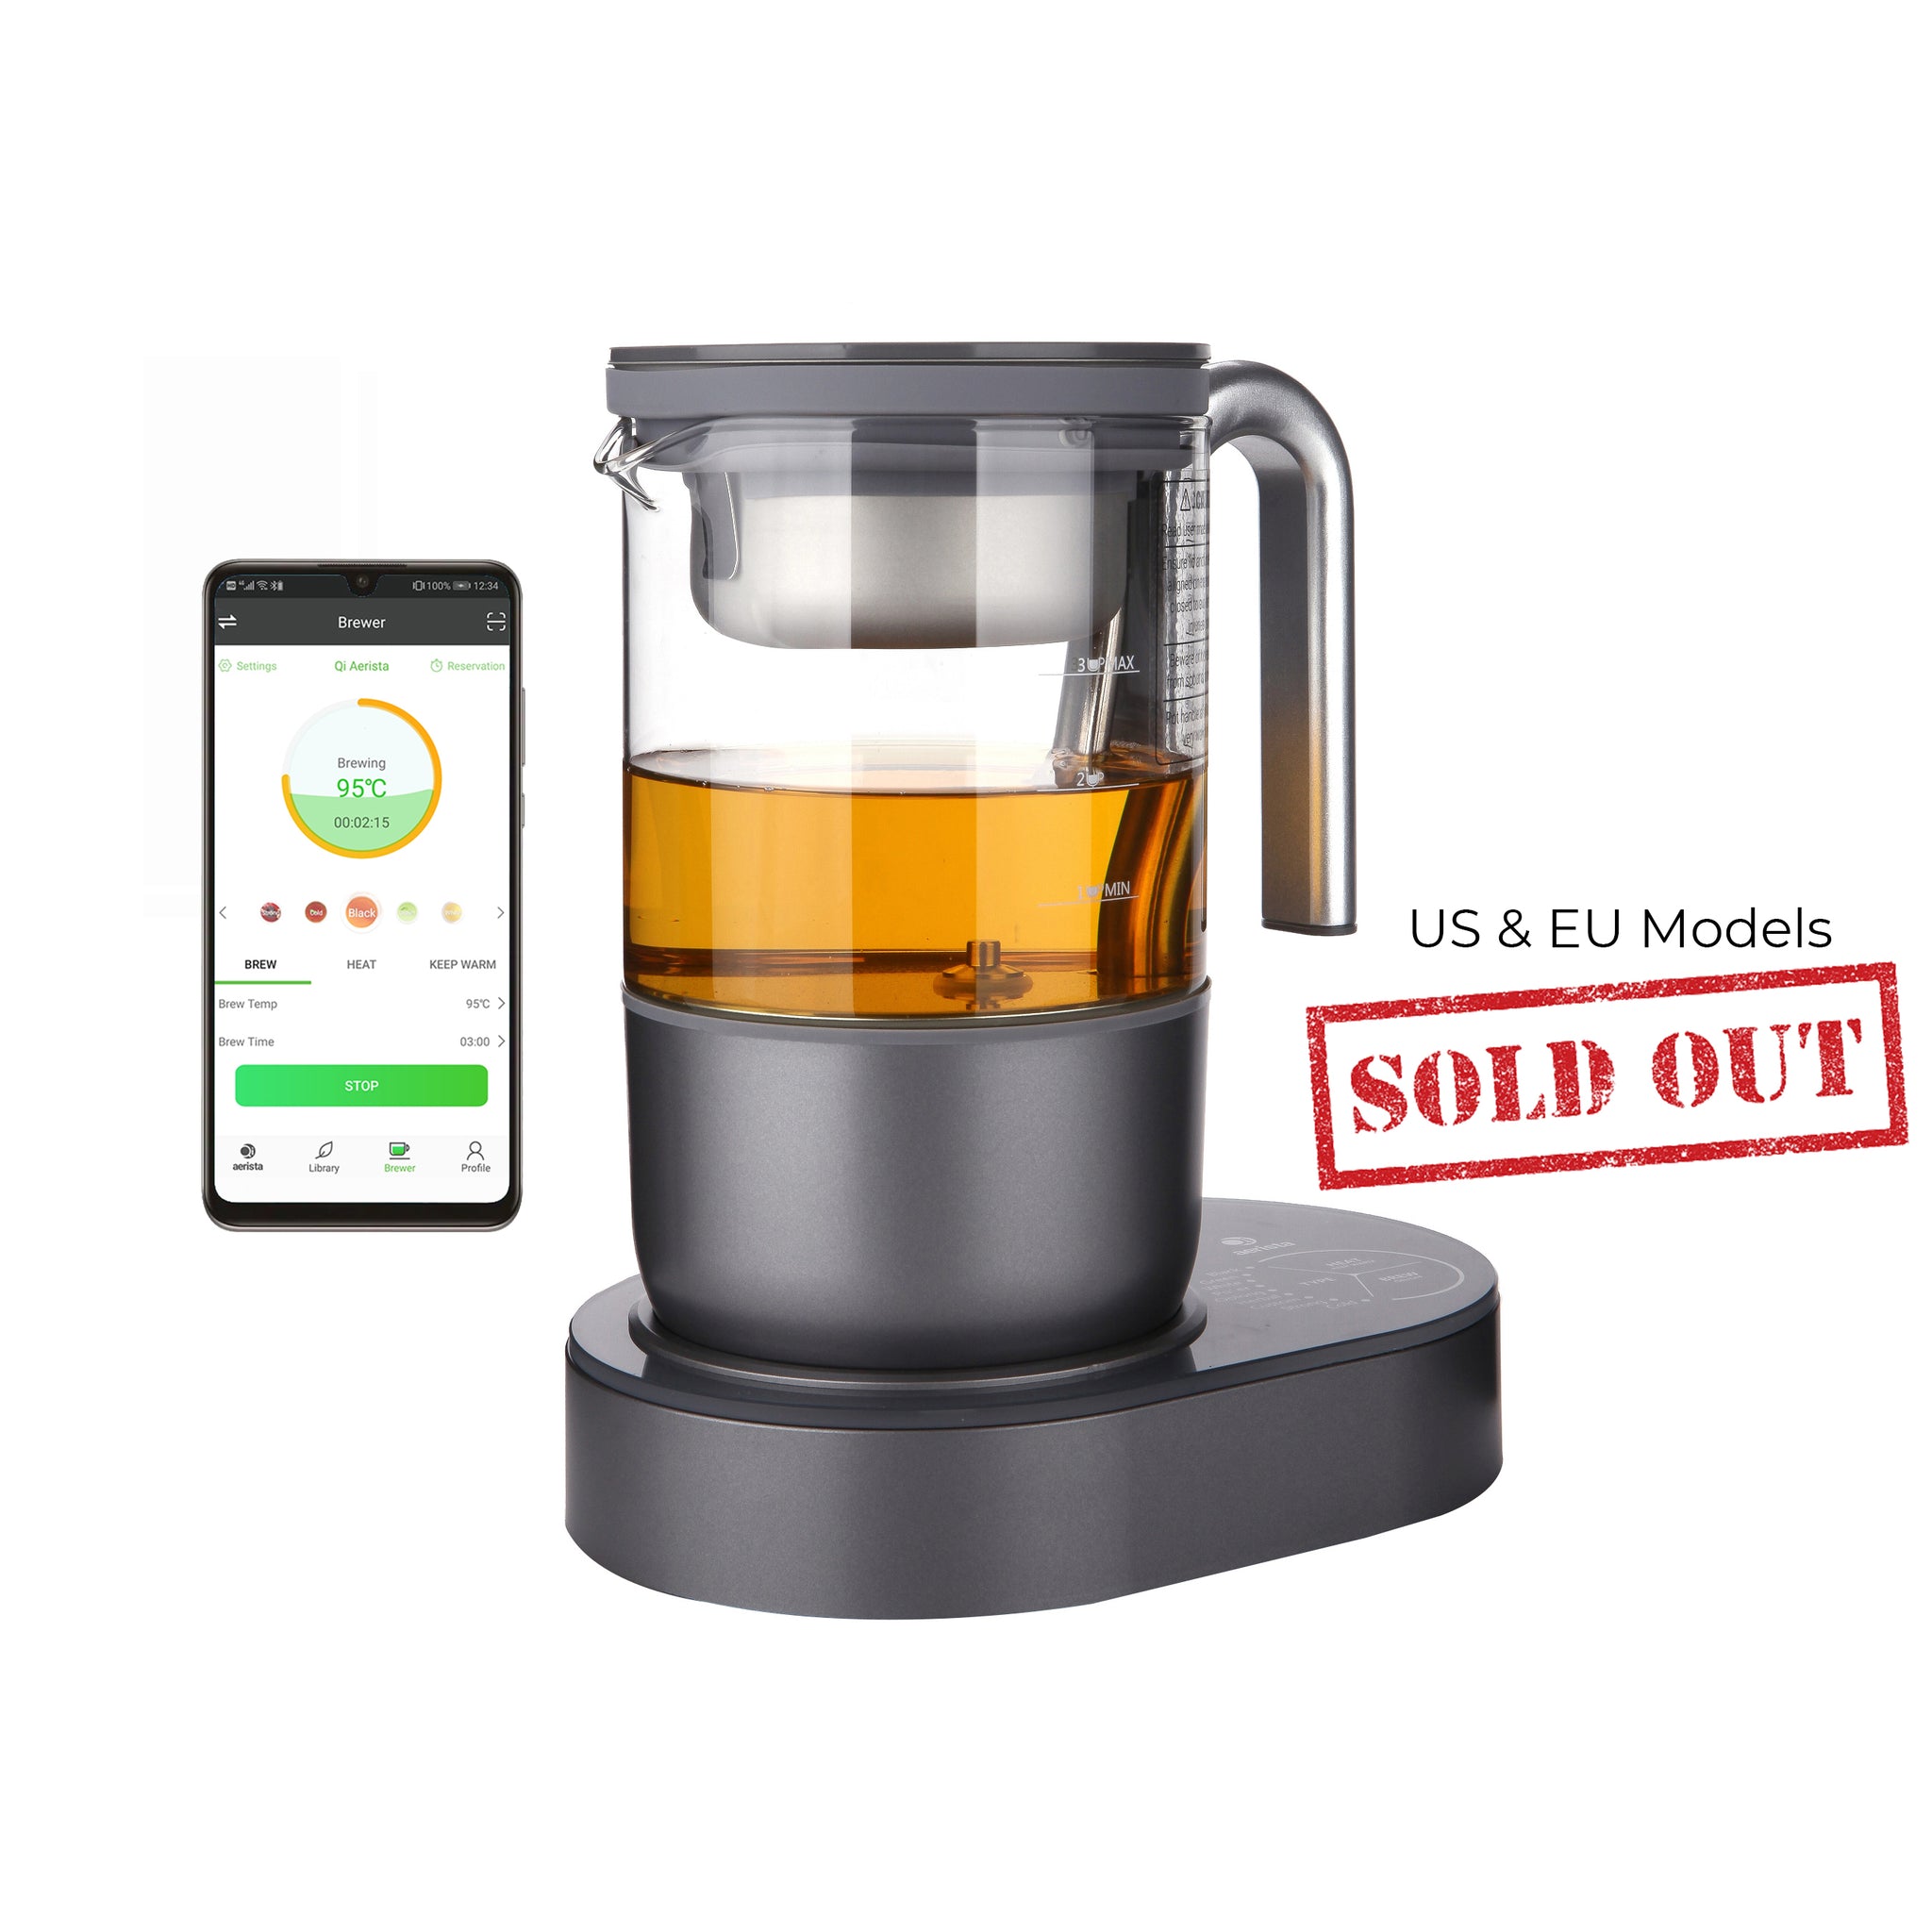 Qi Aerista US & EU Brewer Models all SOLD OUT!